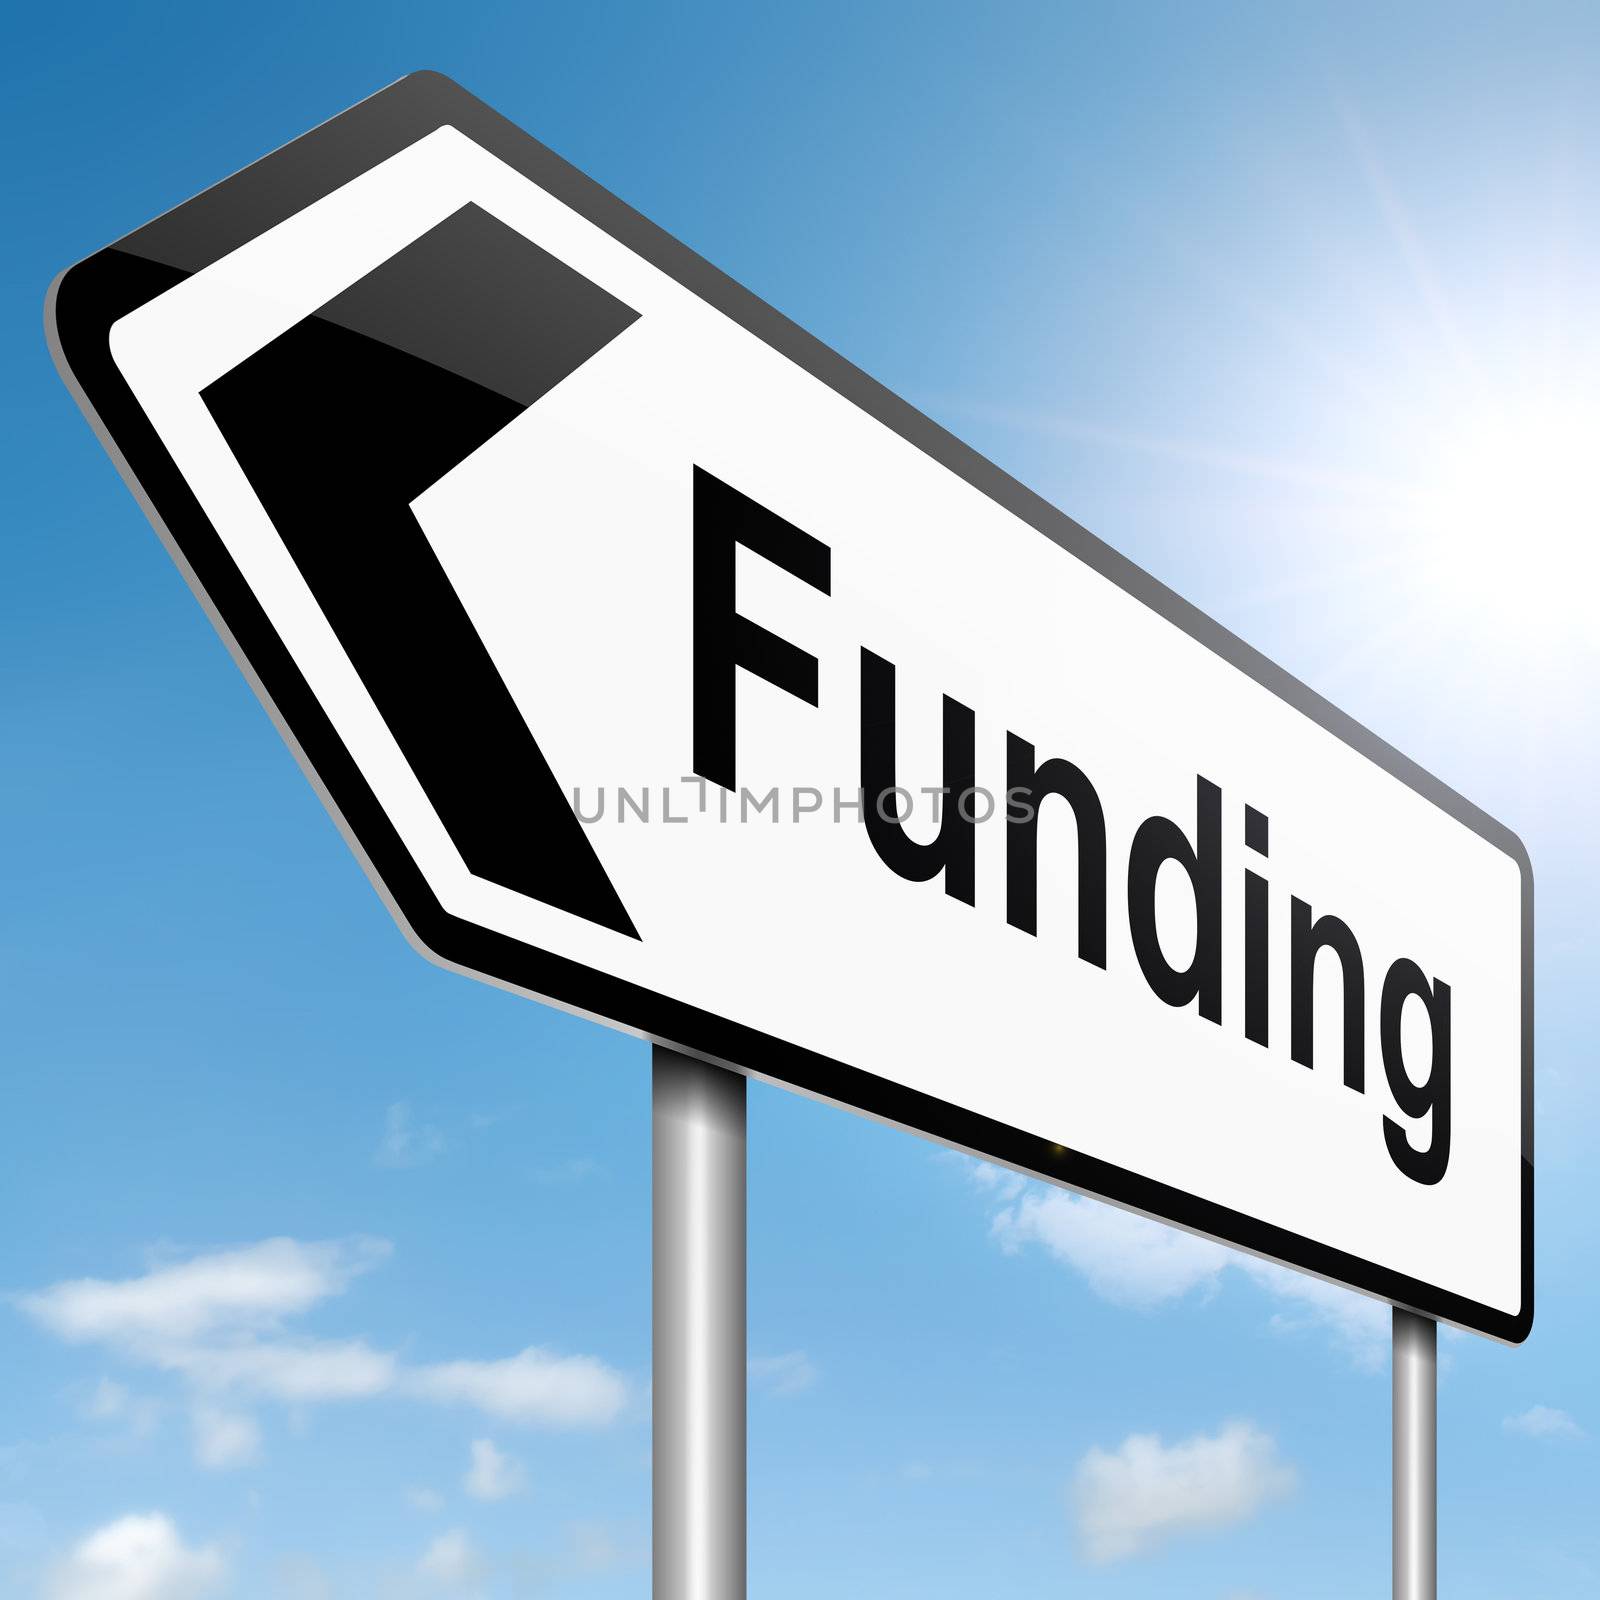 Illustration depicting a roadsign with a funding concept. Sky background.